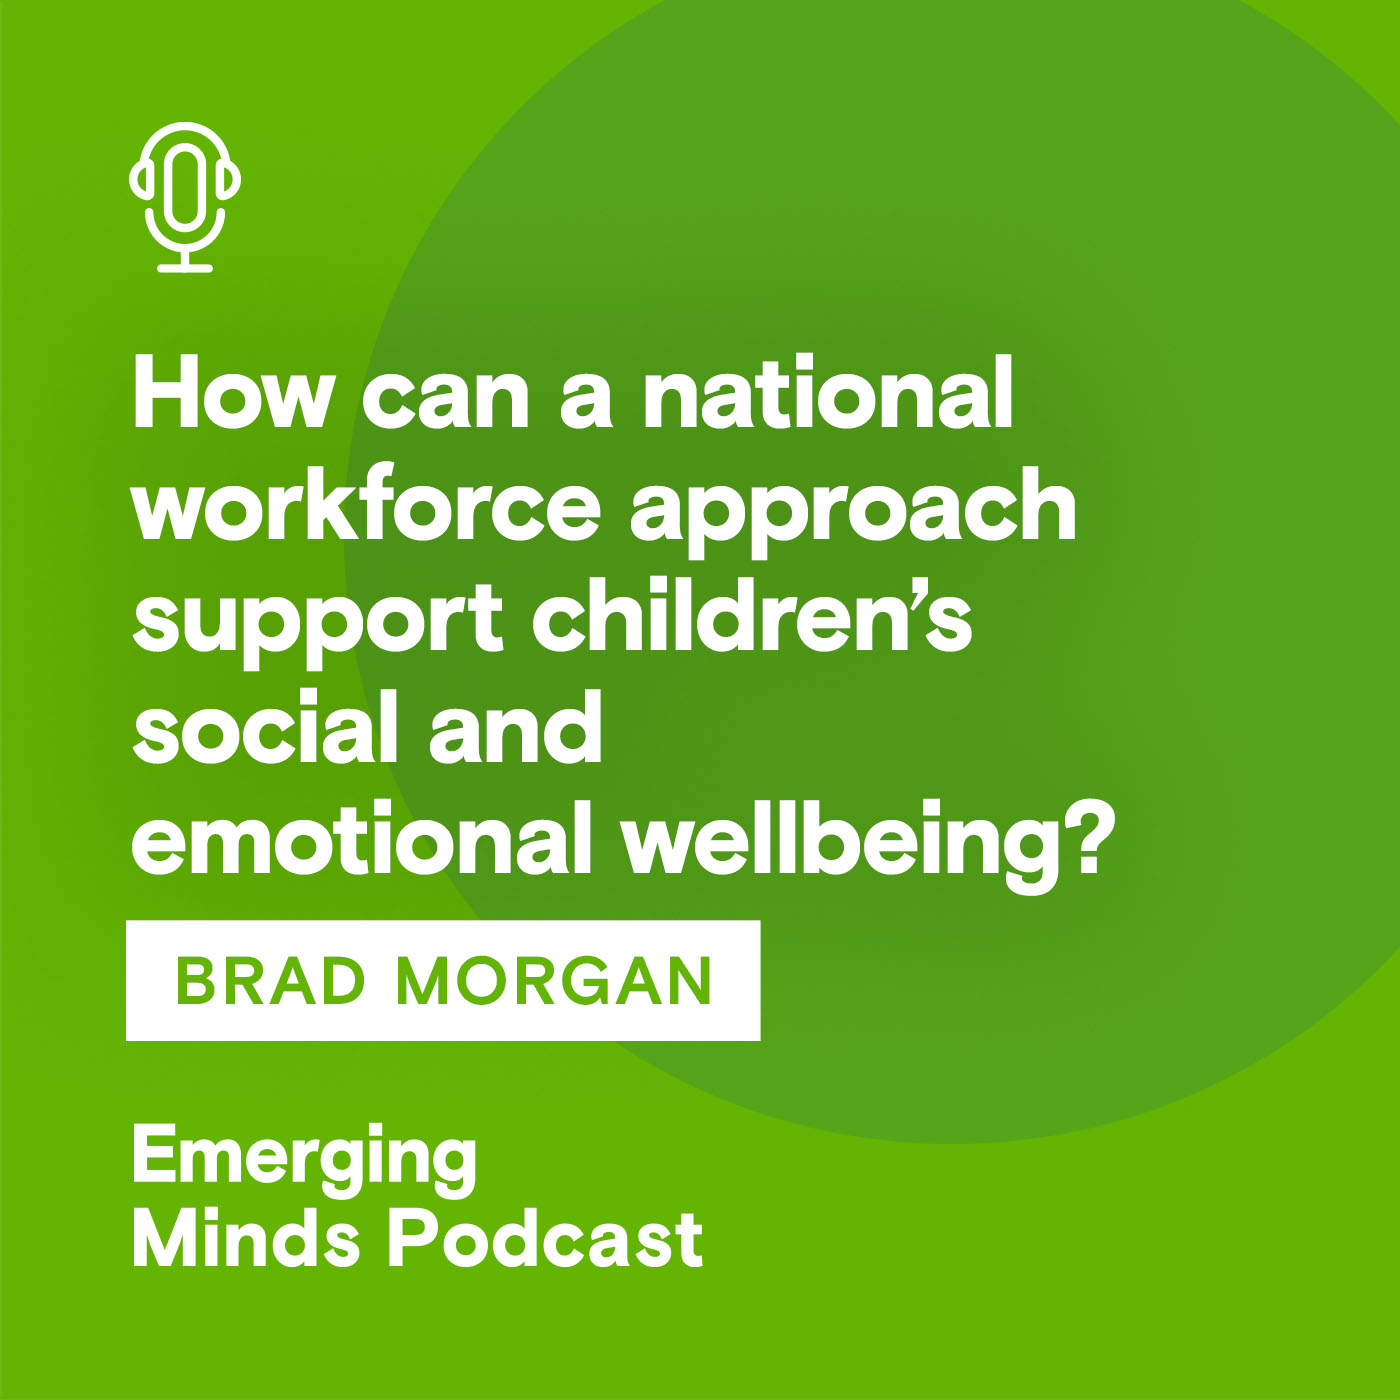 How can a national workforce approach support children's social and emotional wellbeing?